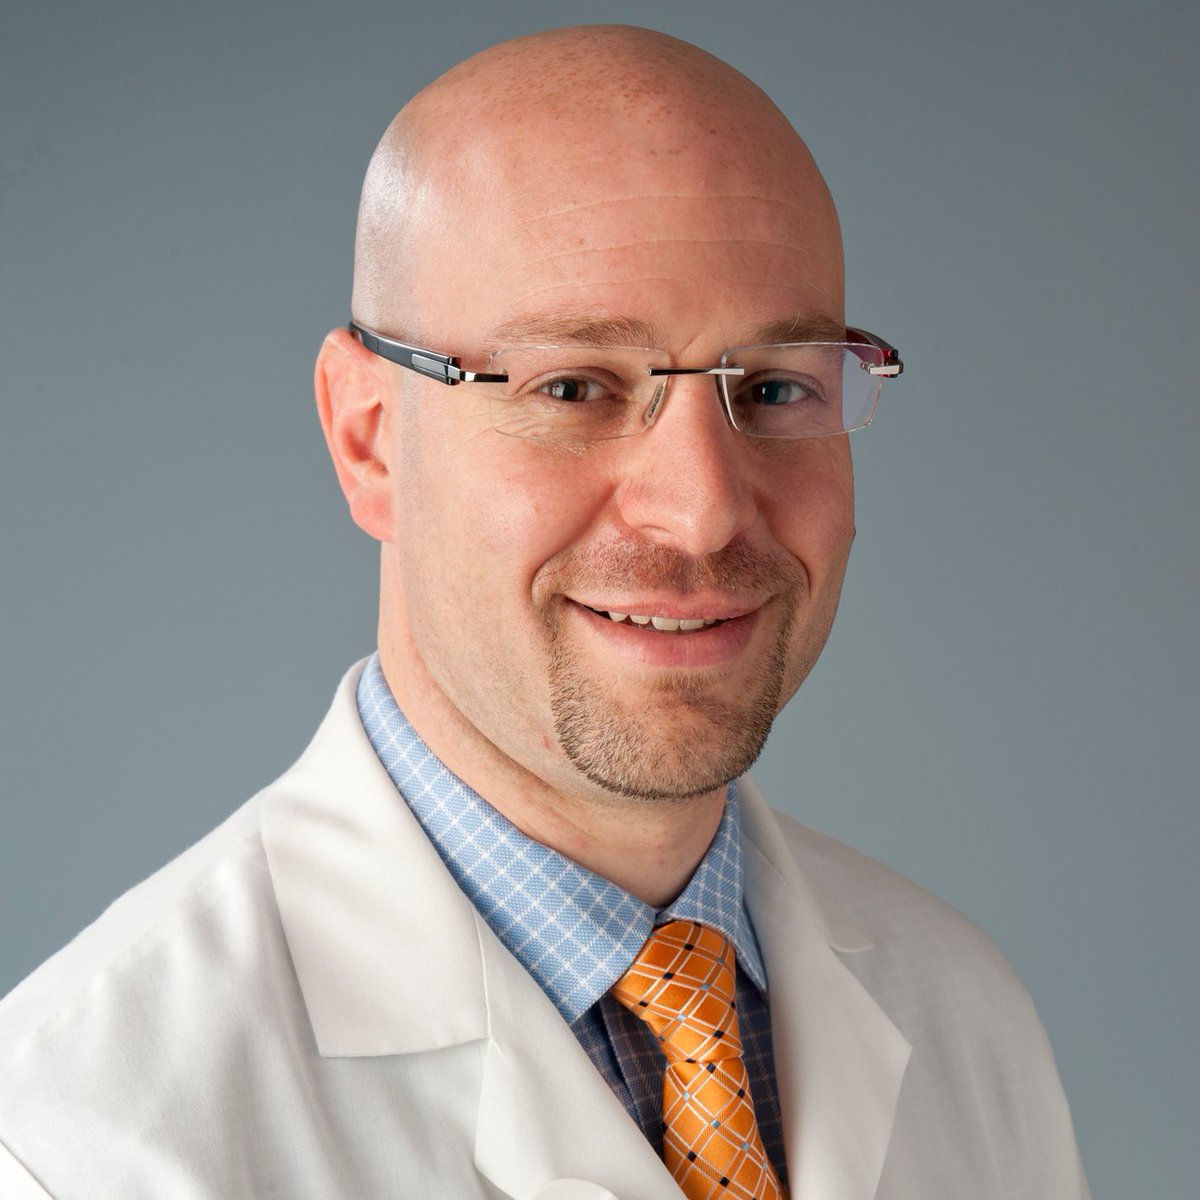 Congratulations to Dr. Alan Bonder on his well-deserved promotion to Associate Professor at @harvardmed! As Medical Director of Liver Transplant, he and the team have grown our program to 100+ cases annually. He also runs a vibrant research program in cholestatic liver diseases.